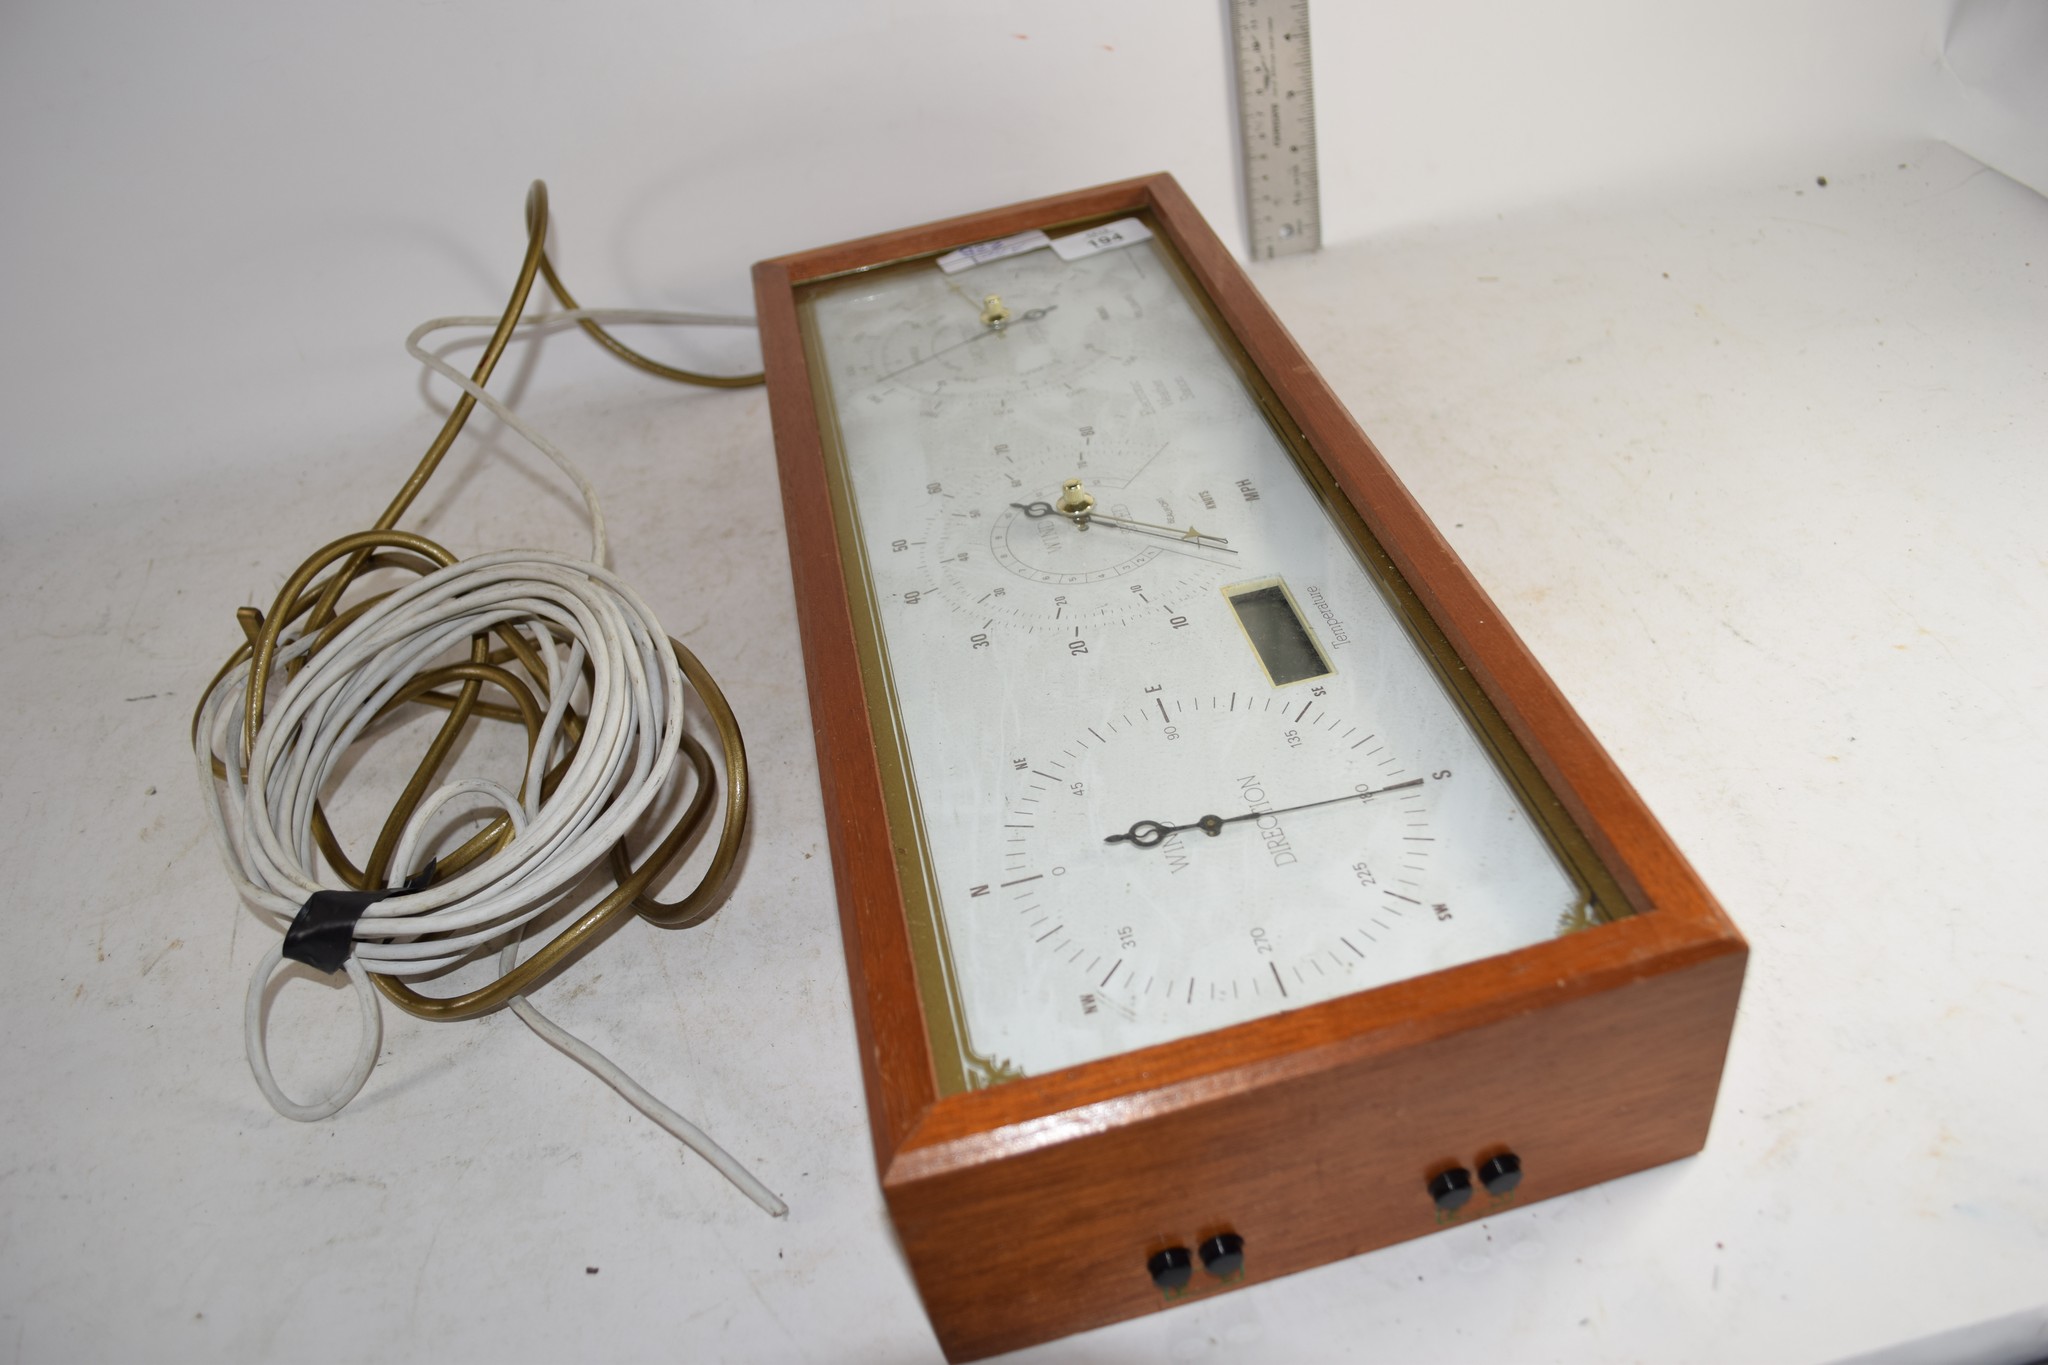 BOX CONTAINING PAPERWEIGHTS AND AN ELECTRONIC WEATHER STATION